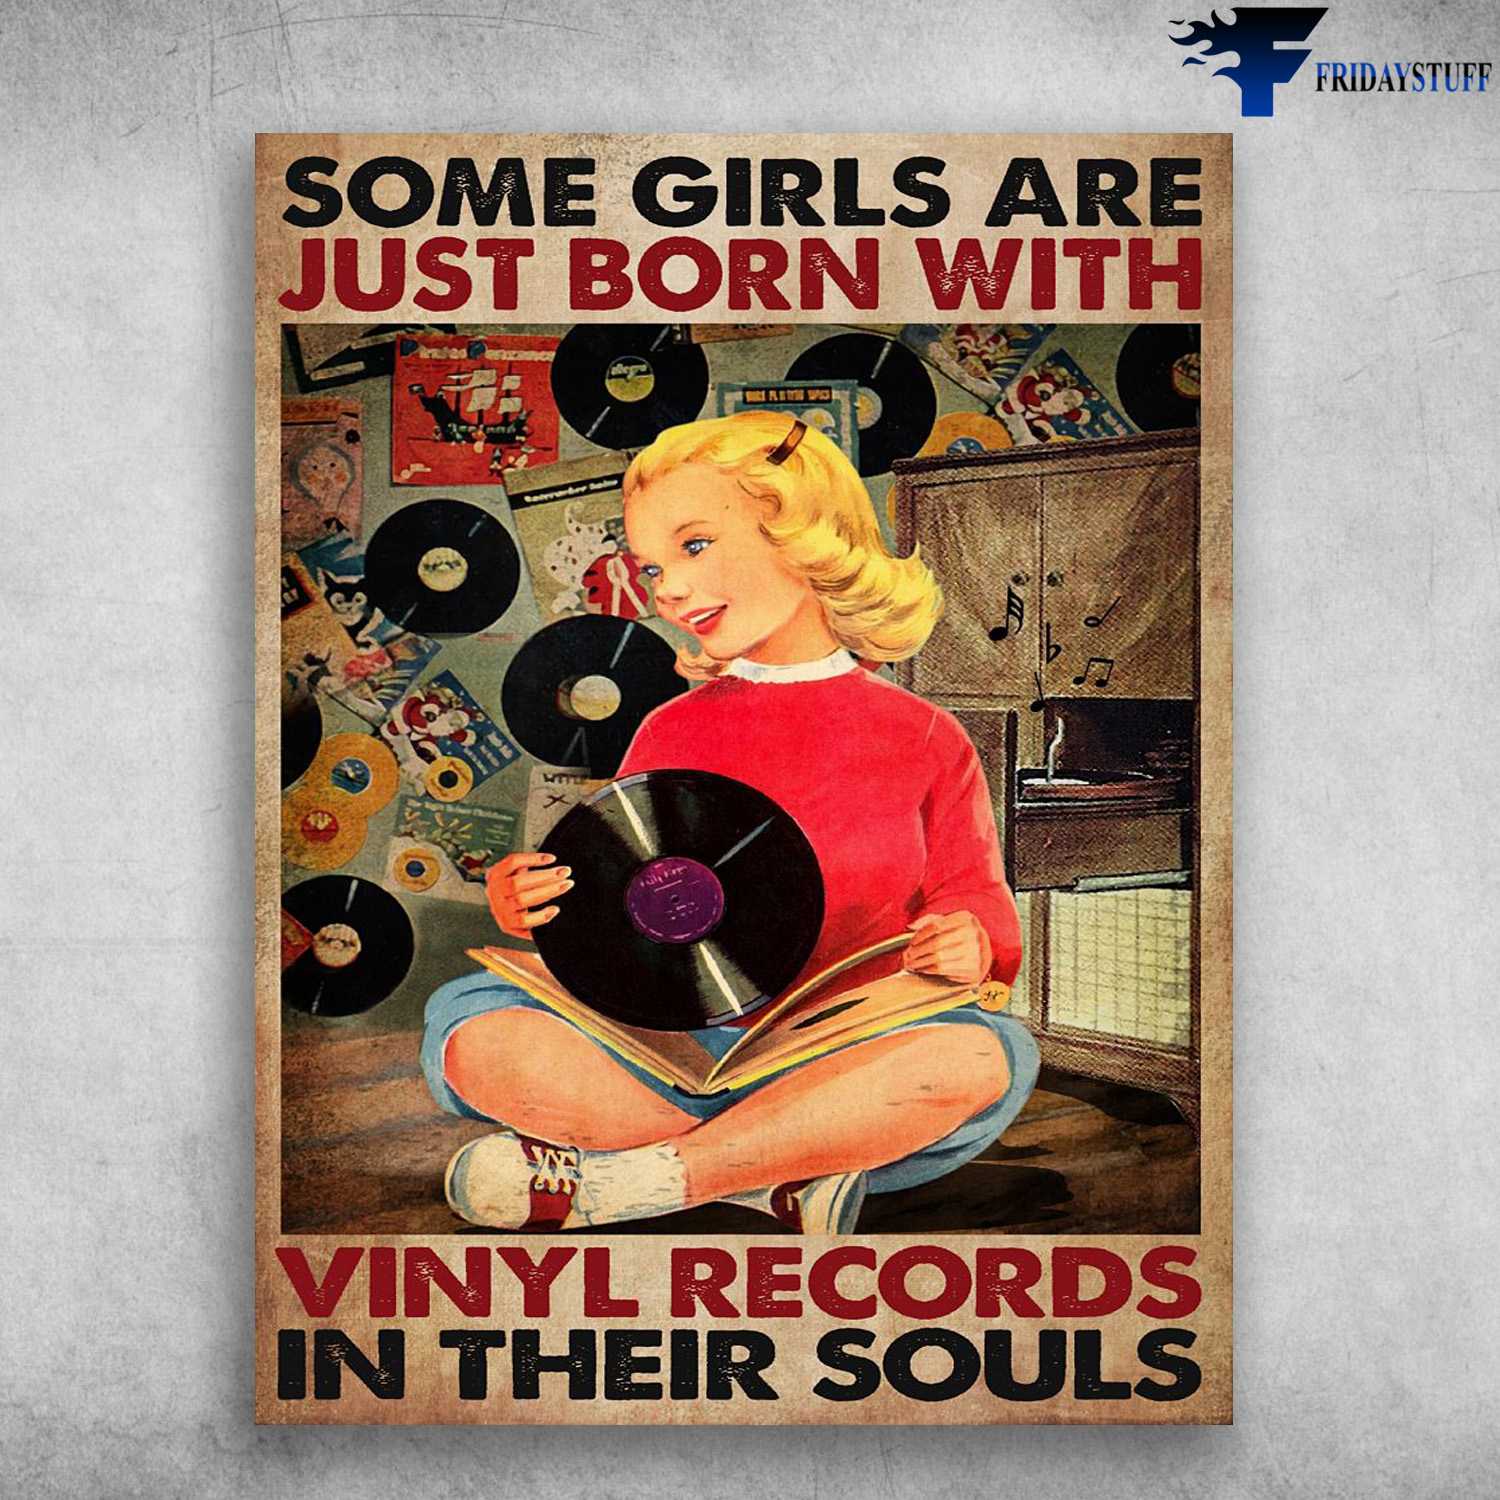 Vinyl Record, Old Music Lover - Some Girl's Are Just Born With, Vinyl Records In Their Souls